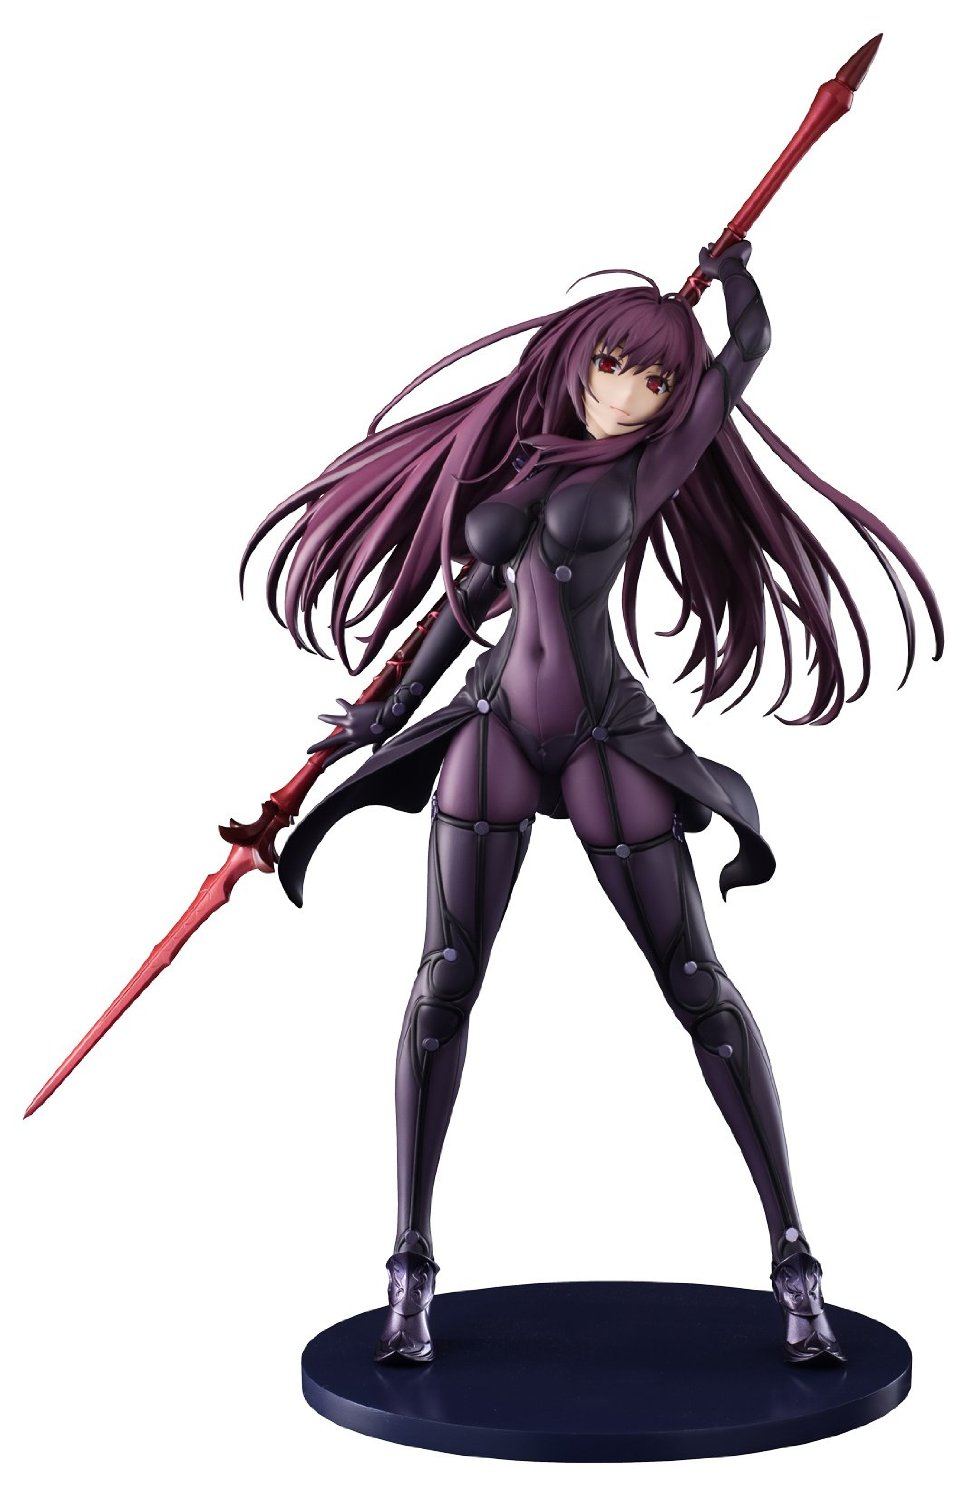 FATE/GRAND ORDER 1/7 SCALE PRE-PAINTED FIGURE: LANCER / SCATHACH (RE-RUN) Plum